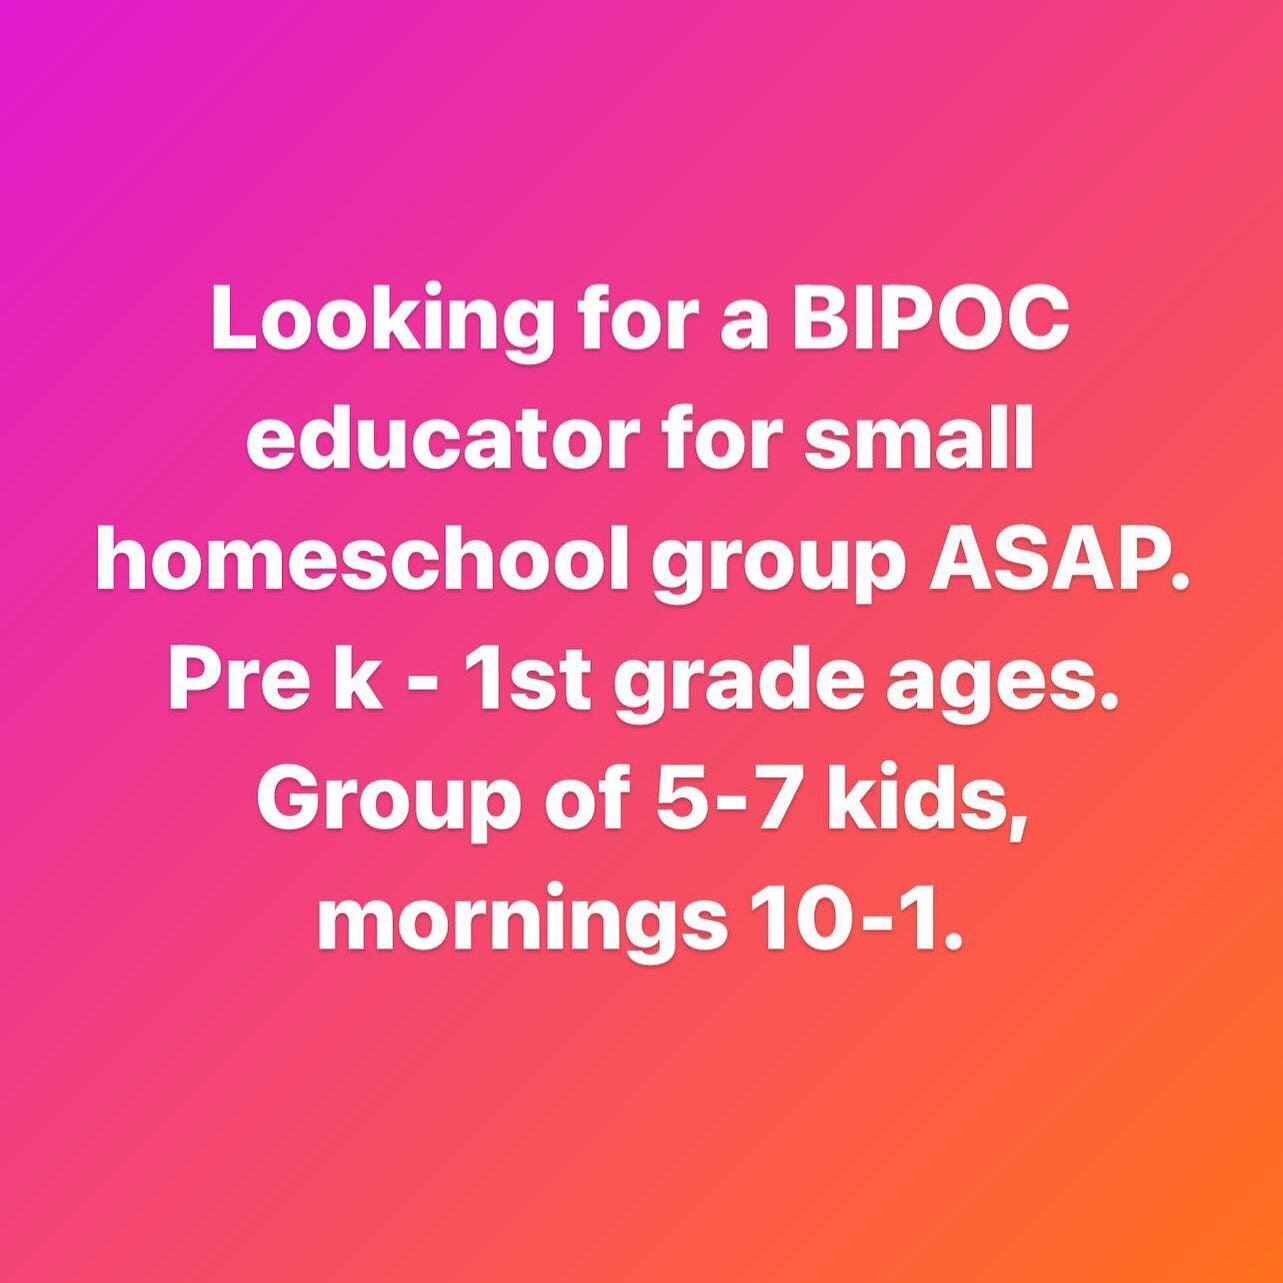 PITTSBURGH!!! Looking for a Black, Indigenous, Person of Color educator for a group of pre k - 1st grade aged kids.  About 5-7 will always have a parent helper. Would love STEAM / Arts / Agriculture (any of these) background led educator.  ASAP - par